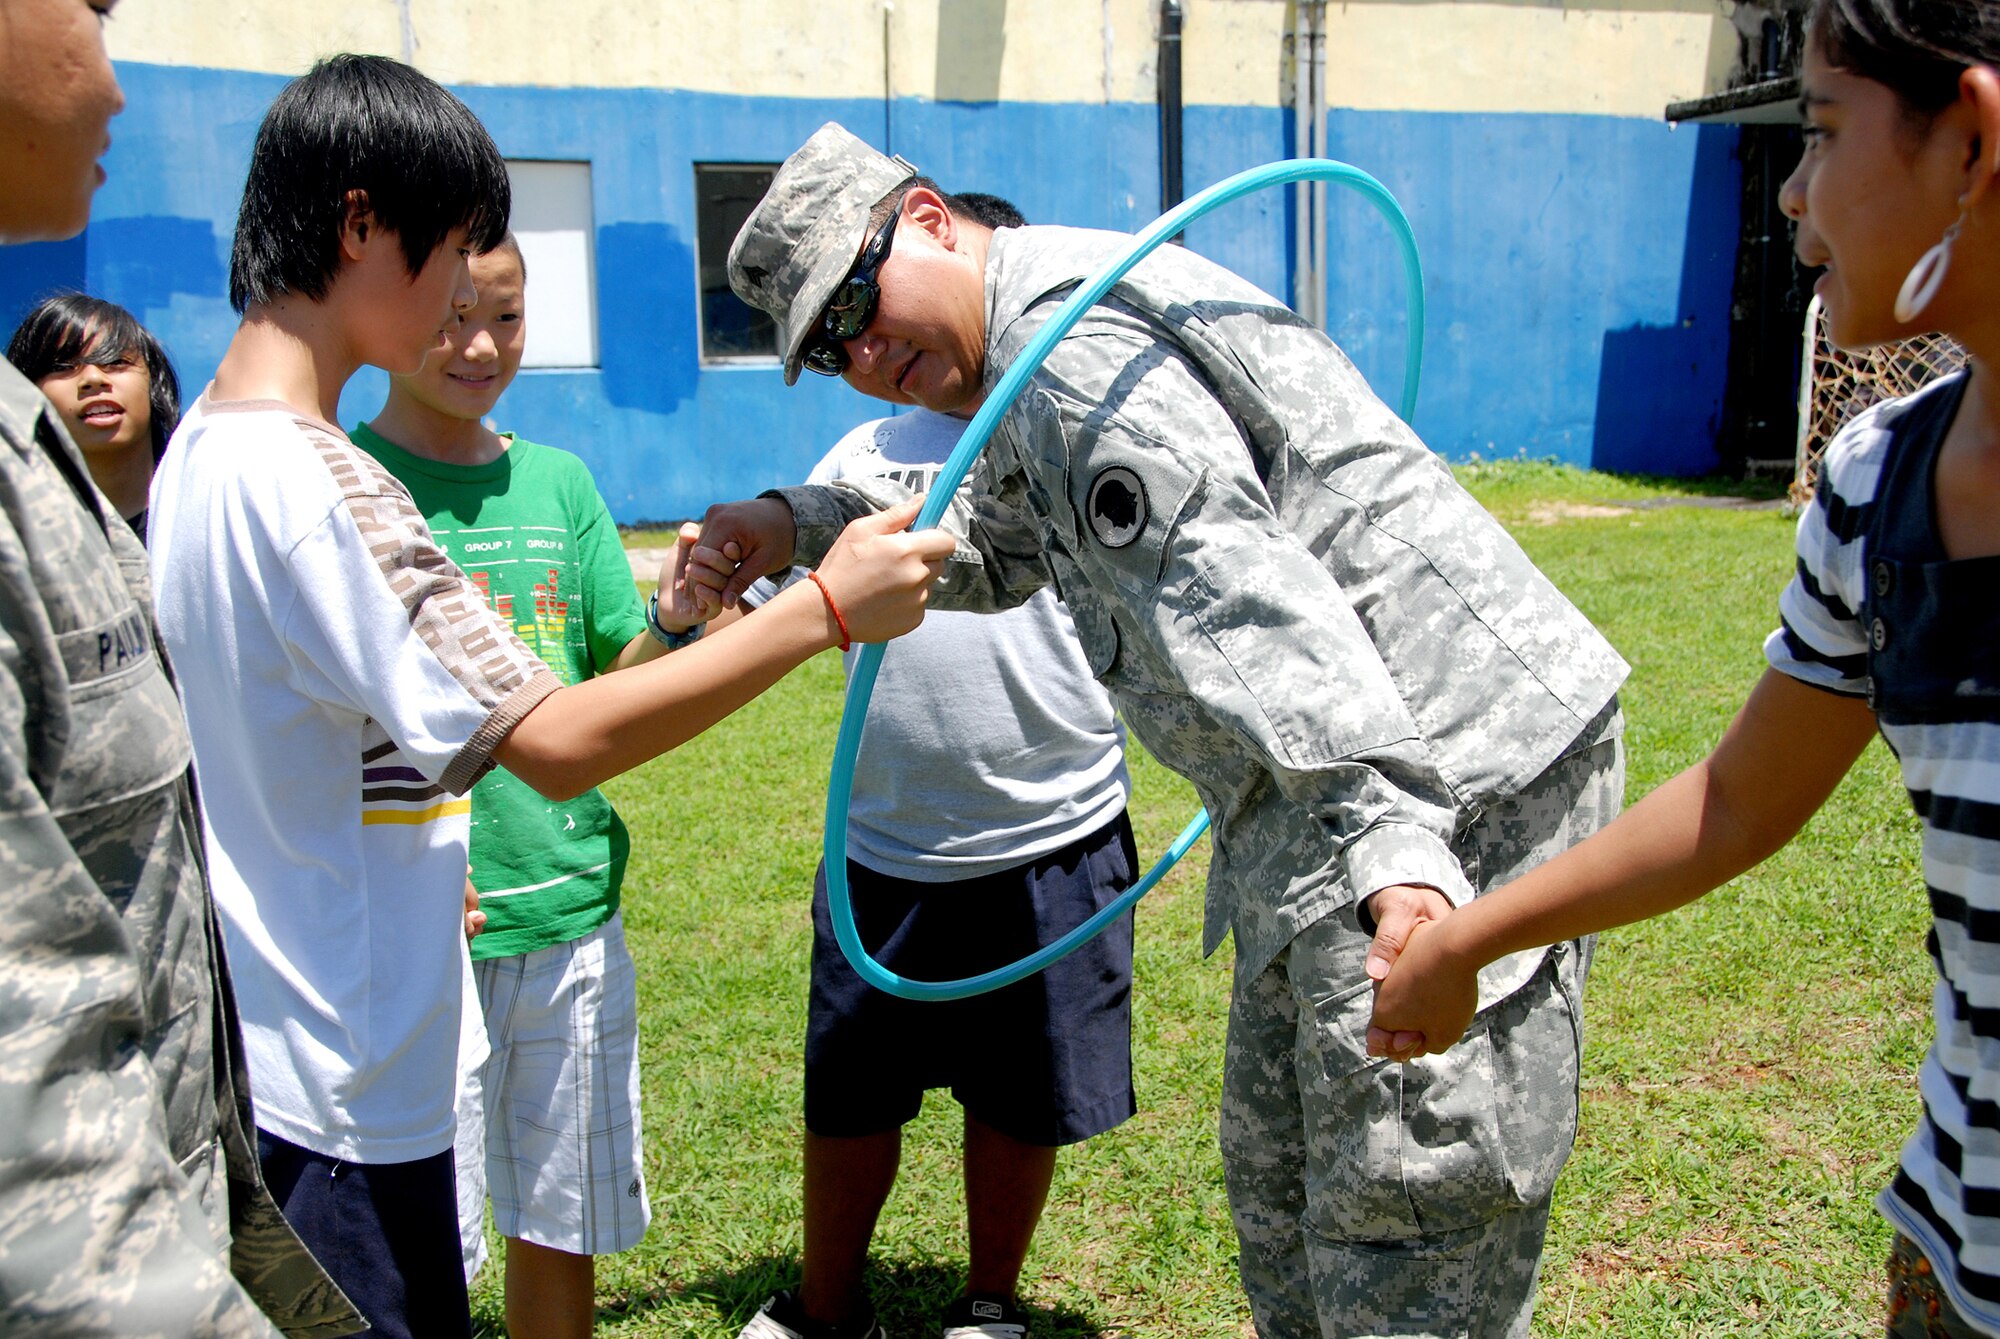 Sgt. Isaac Norita, Counterdrug, Hawaii Army National Guard, works his way through Hula Hoop as middle school students try to get through the Hula Hoop without touching it or breaking the human chain. Air and Army National Guard Counterdrug personnel from Hawaii and Idaho joined the Guam Counterdrug Demand Drug Reduction program at V.S.A. Benavente Middle School on Guam, June 29. The Counterdrug personnel put the students through a serious of exercises designed to develop teamwork and communication. (U.S. Air Force photo/Tech. Sgt. Betty J. Squatrito-Martin)